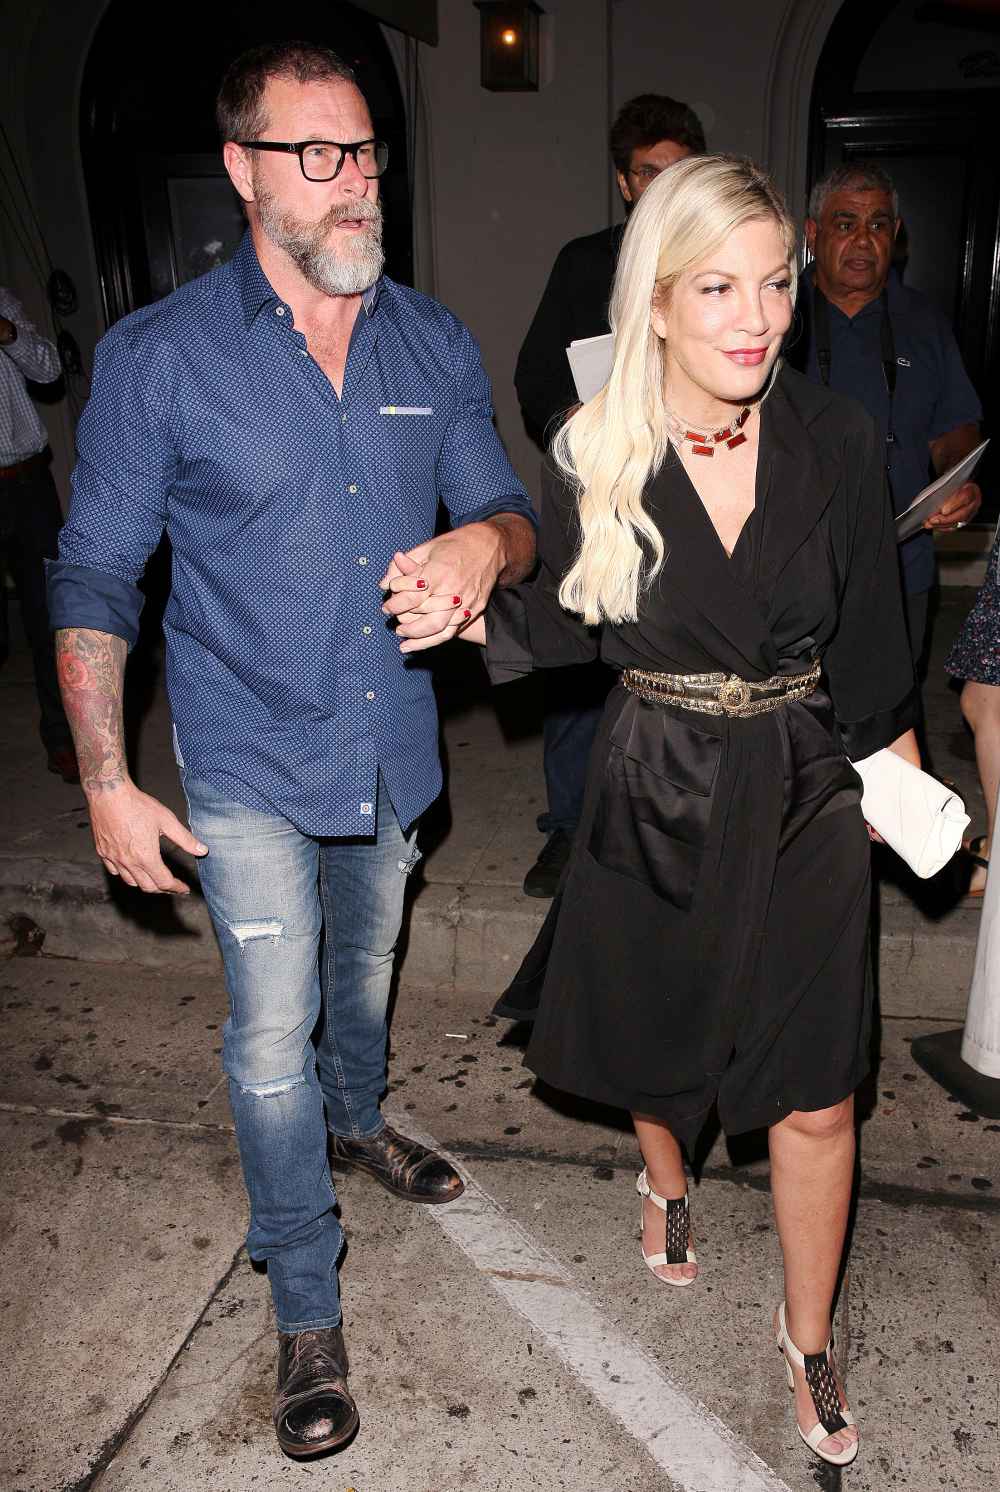 Dean McDermott Reveals He Performed Oral Sex on His Male Friend at Age 10